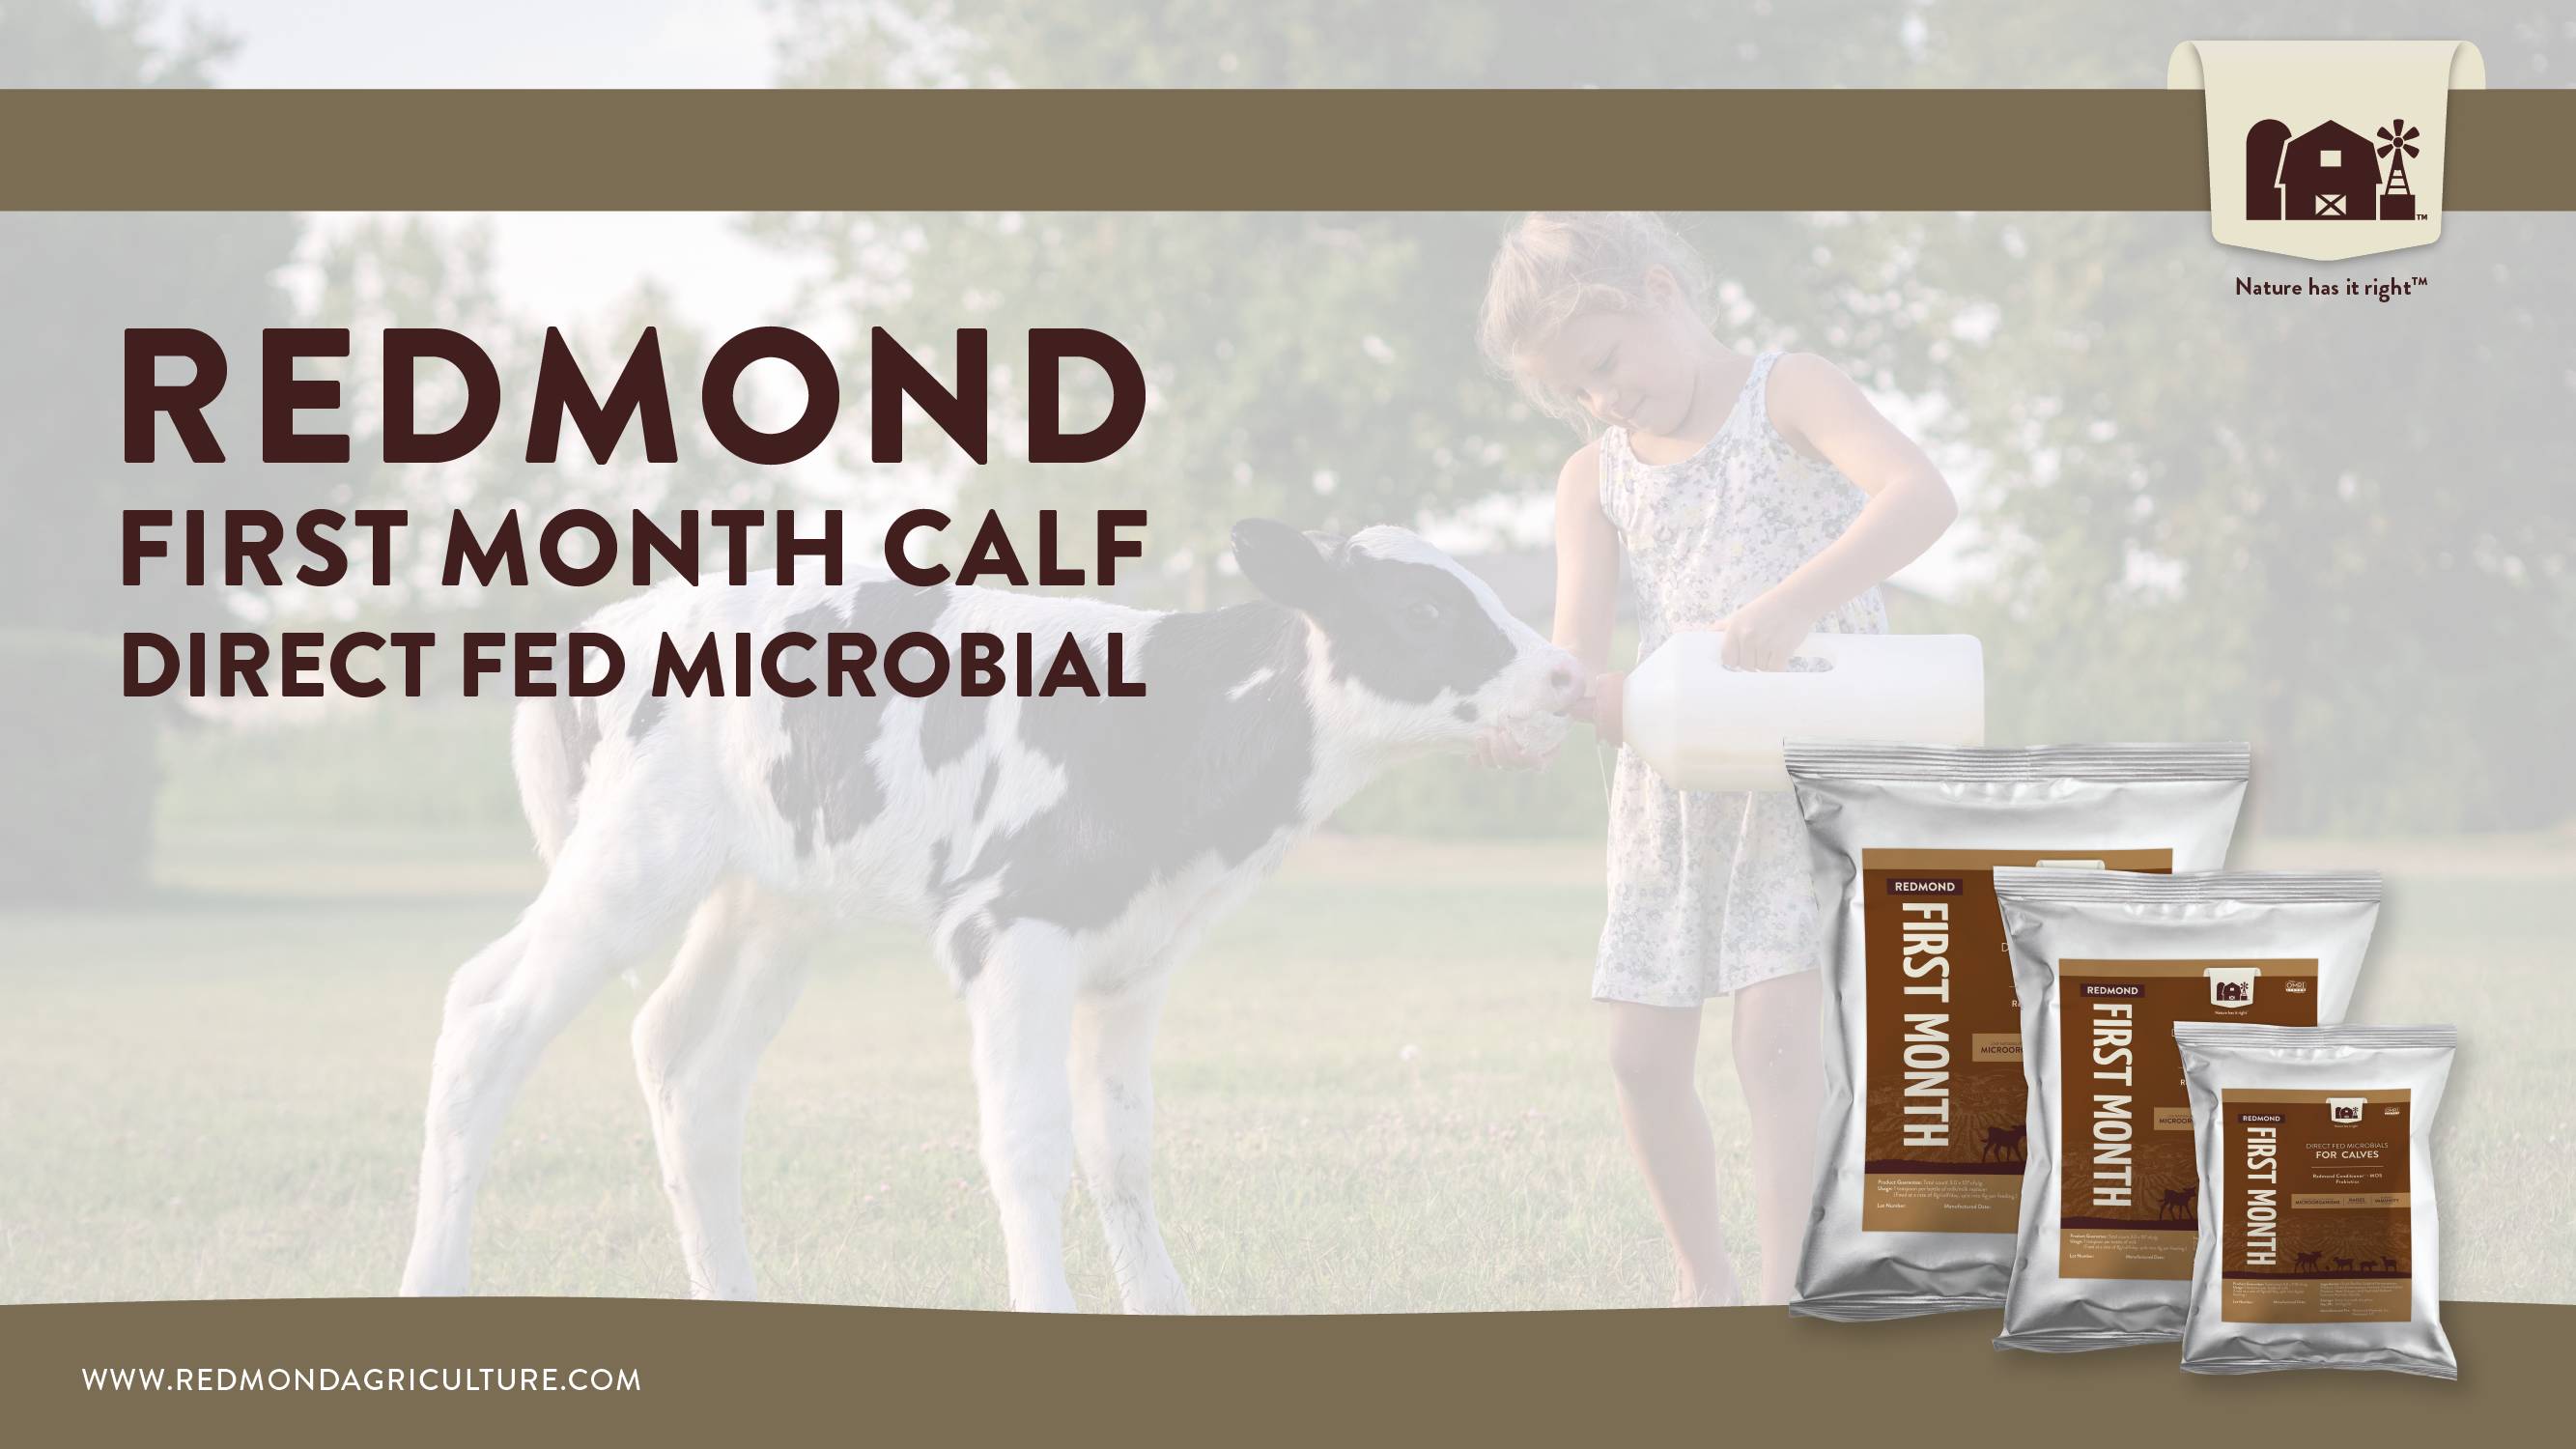 Redmond First Month Calf direct fed microbial supplement